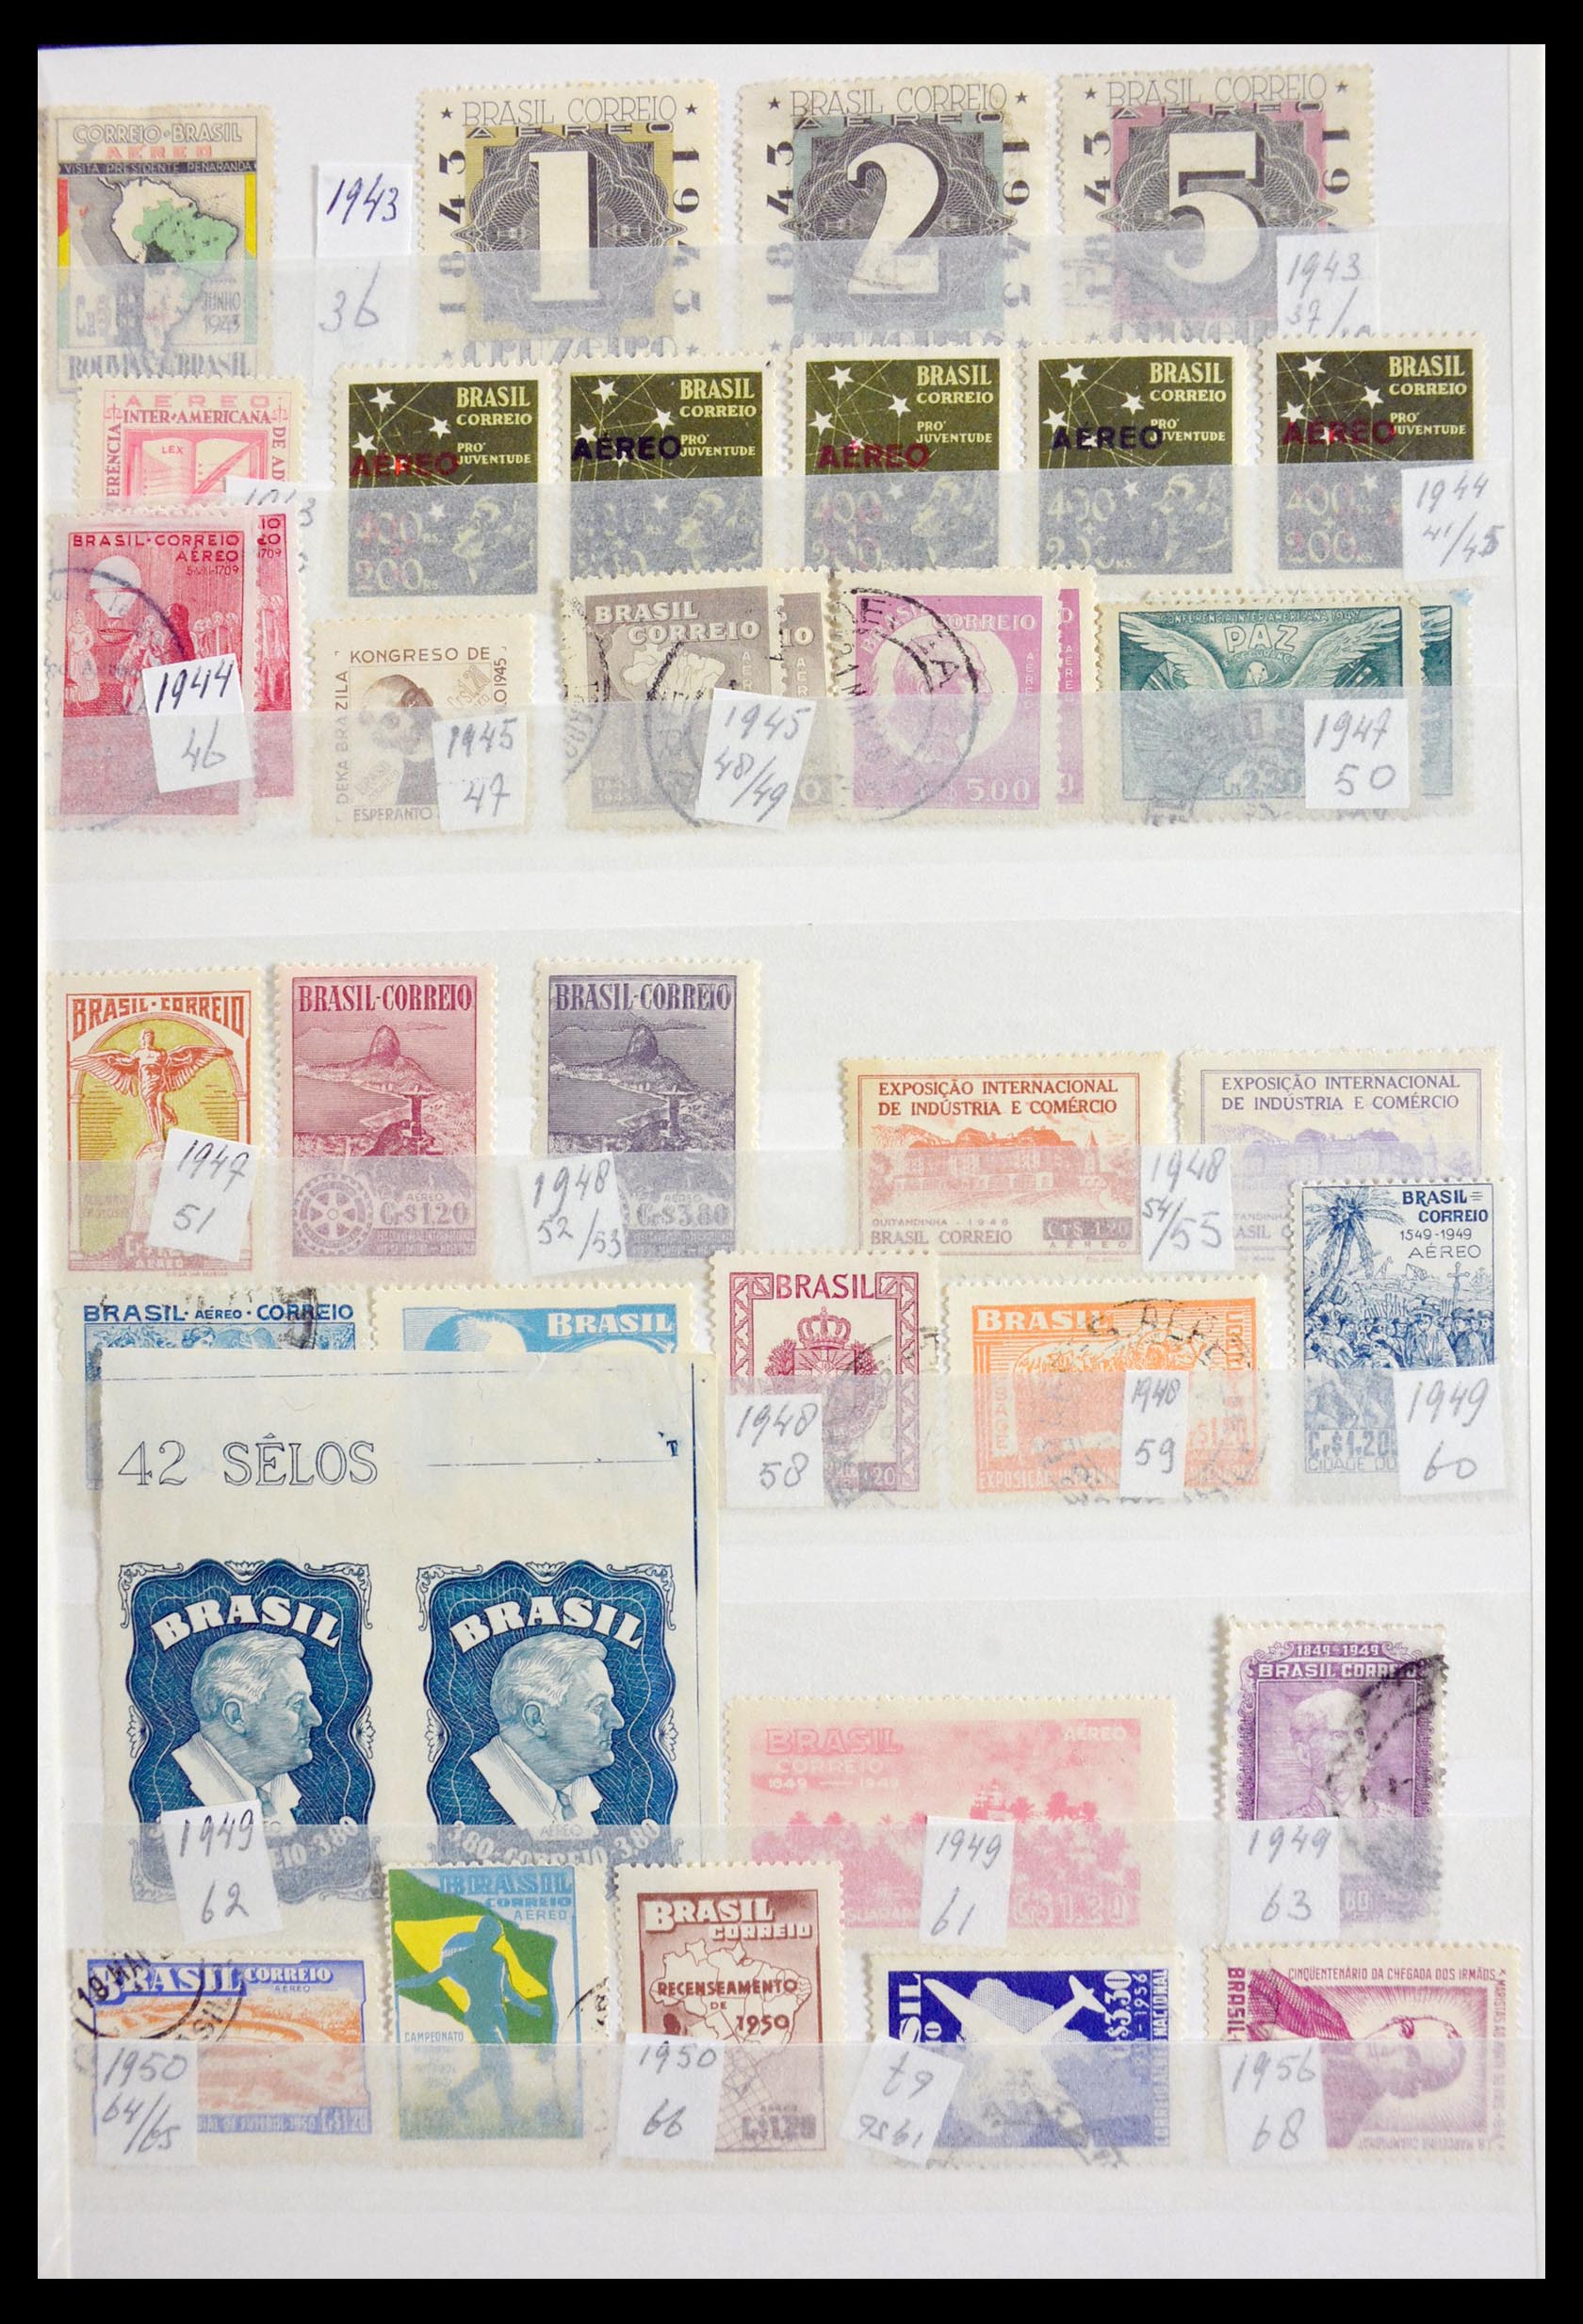 29917 027 - 29917 Latin America airmail stamps.